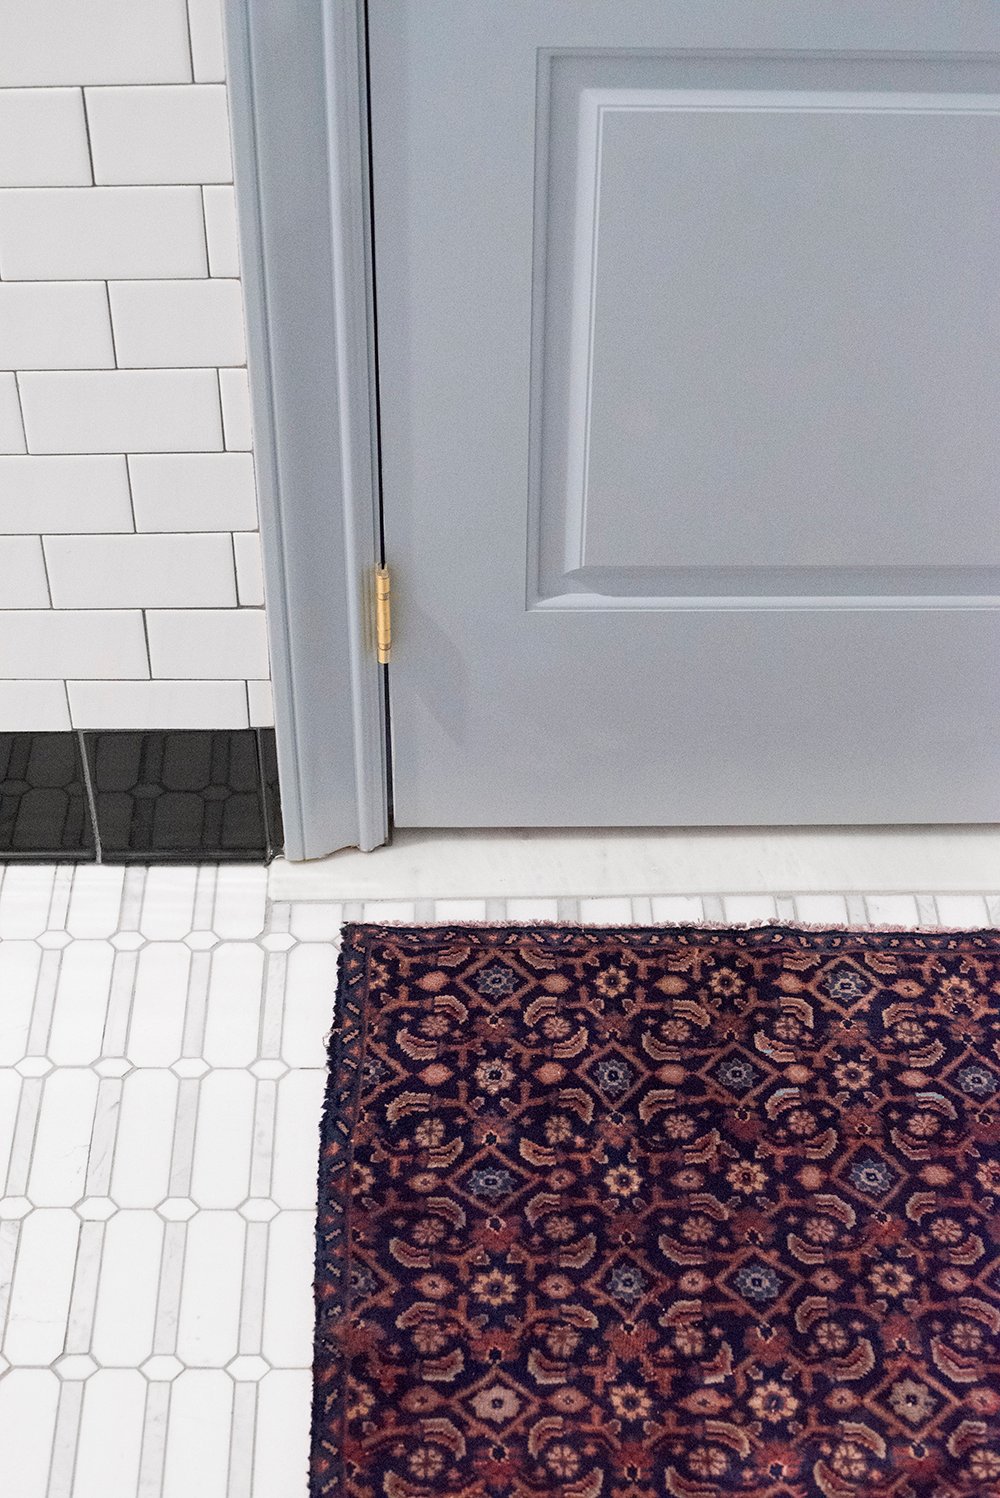 Choosing a Rug for the Bathroom (+ A Vintage Rug Giveaway) - roomfortuesday.com